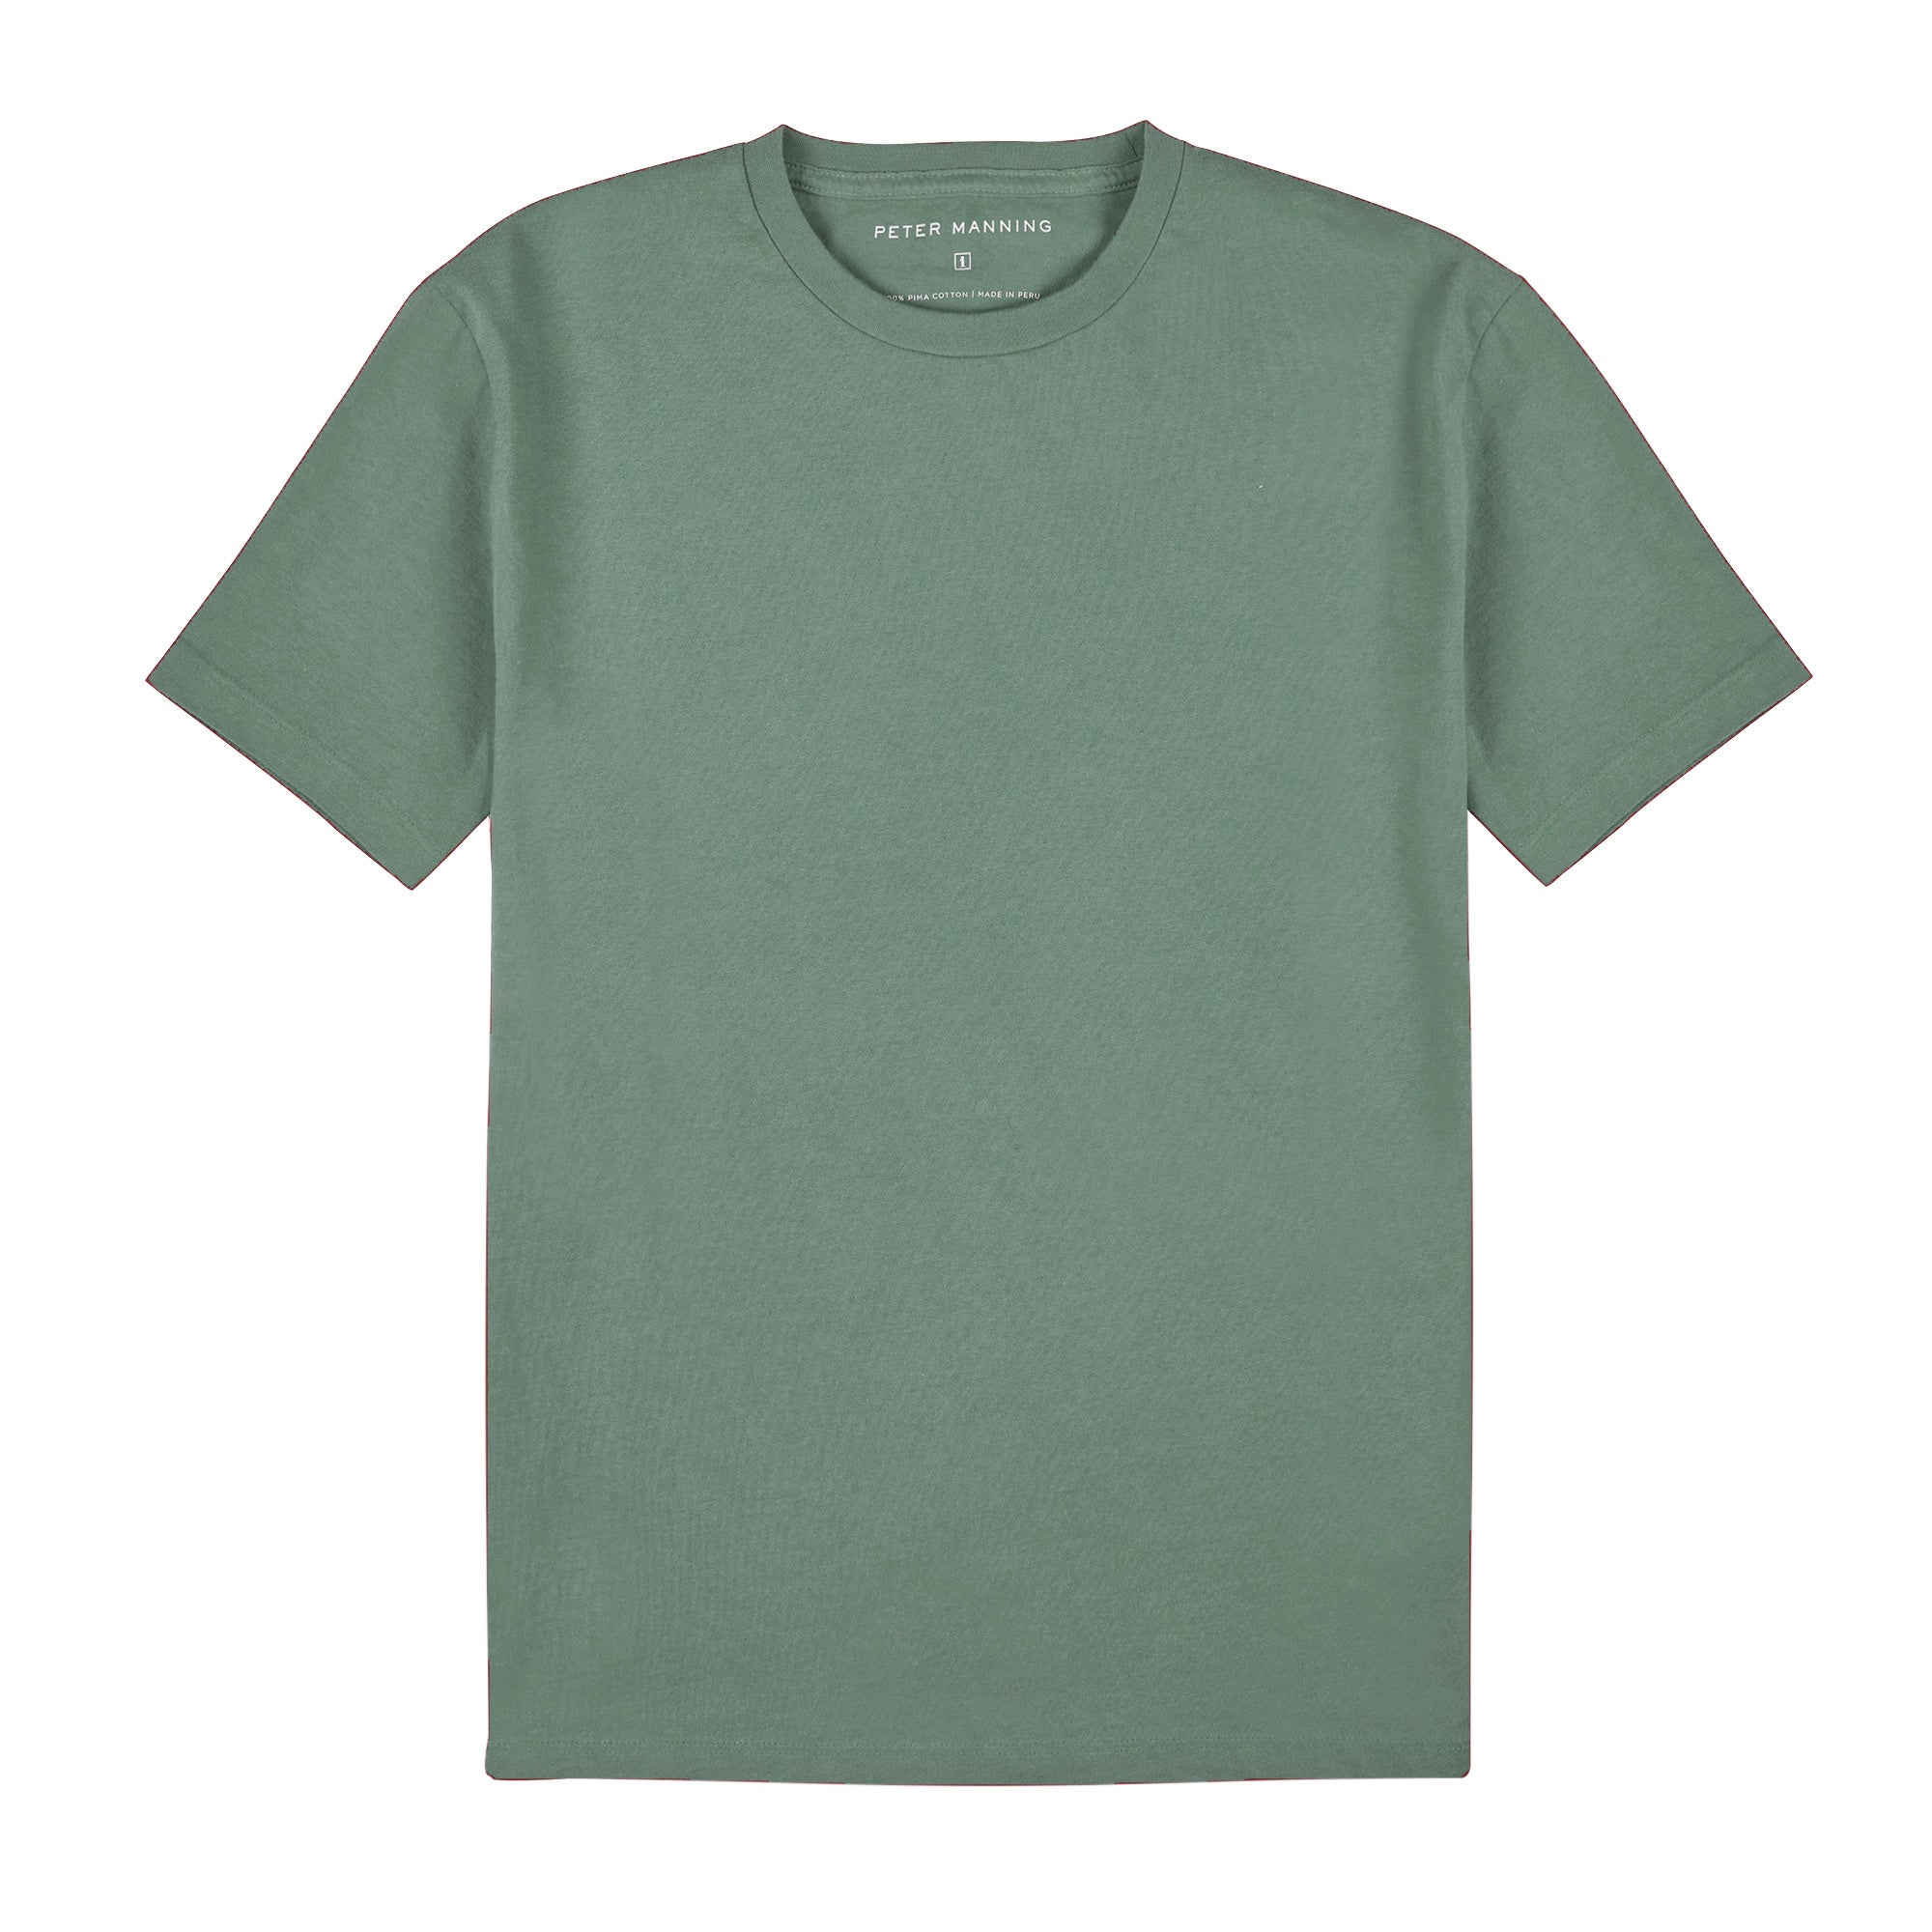 Vintage Crew T-Shirt, Army Green | Peter Manning NYC